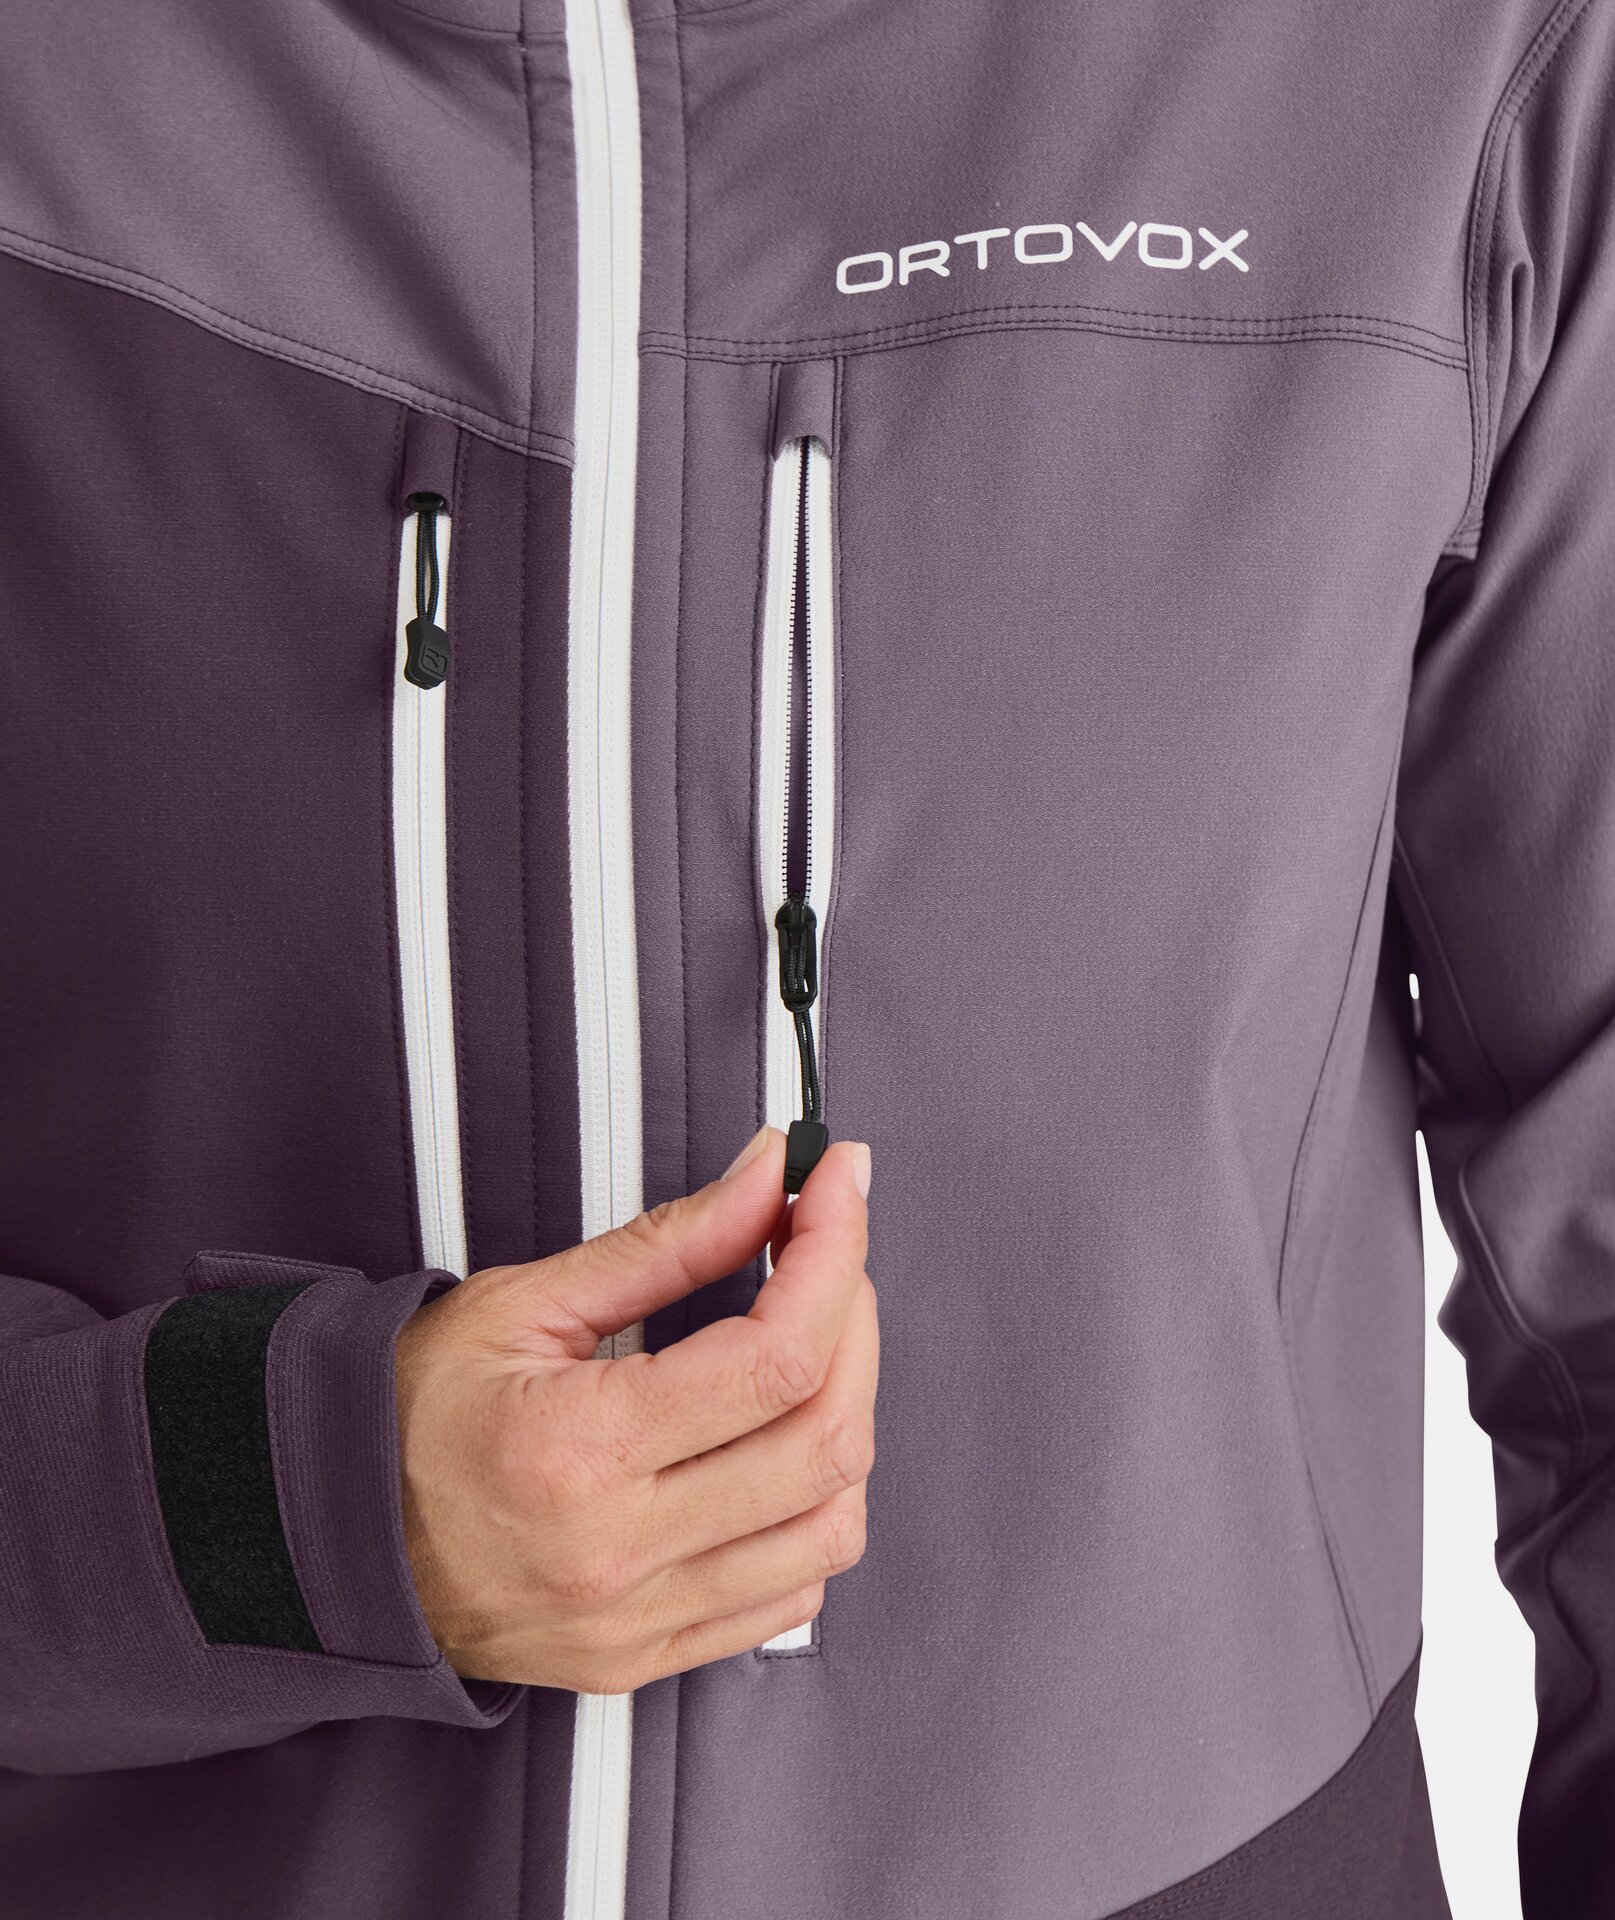 Ortovox Westalpen Softshell Jacket W - Coral - L Your specialist in  outdoor, wintersports, fieldhockey and more